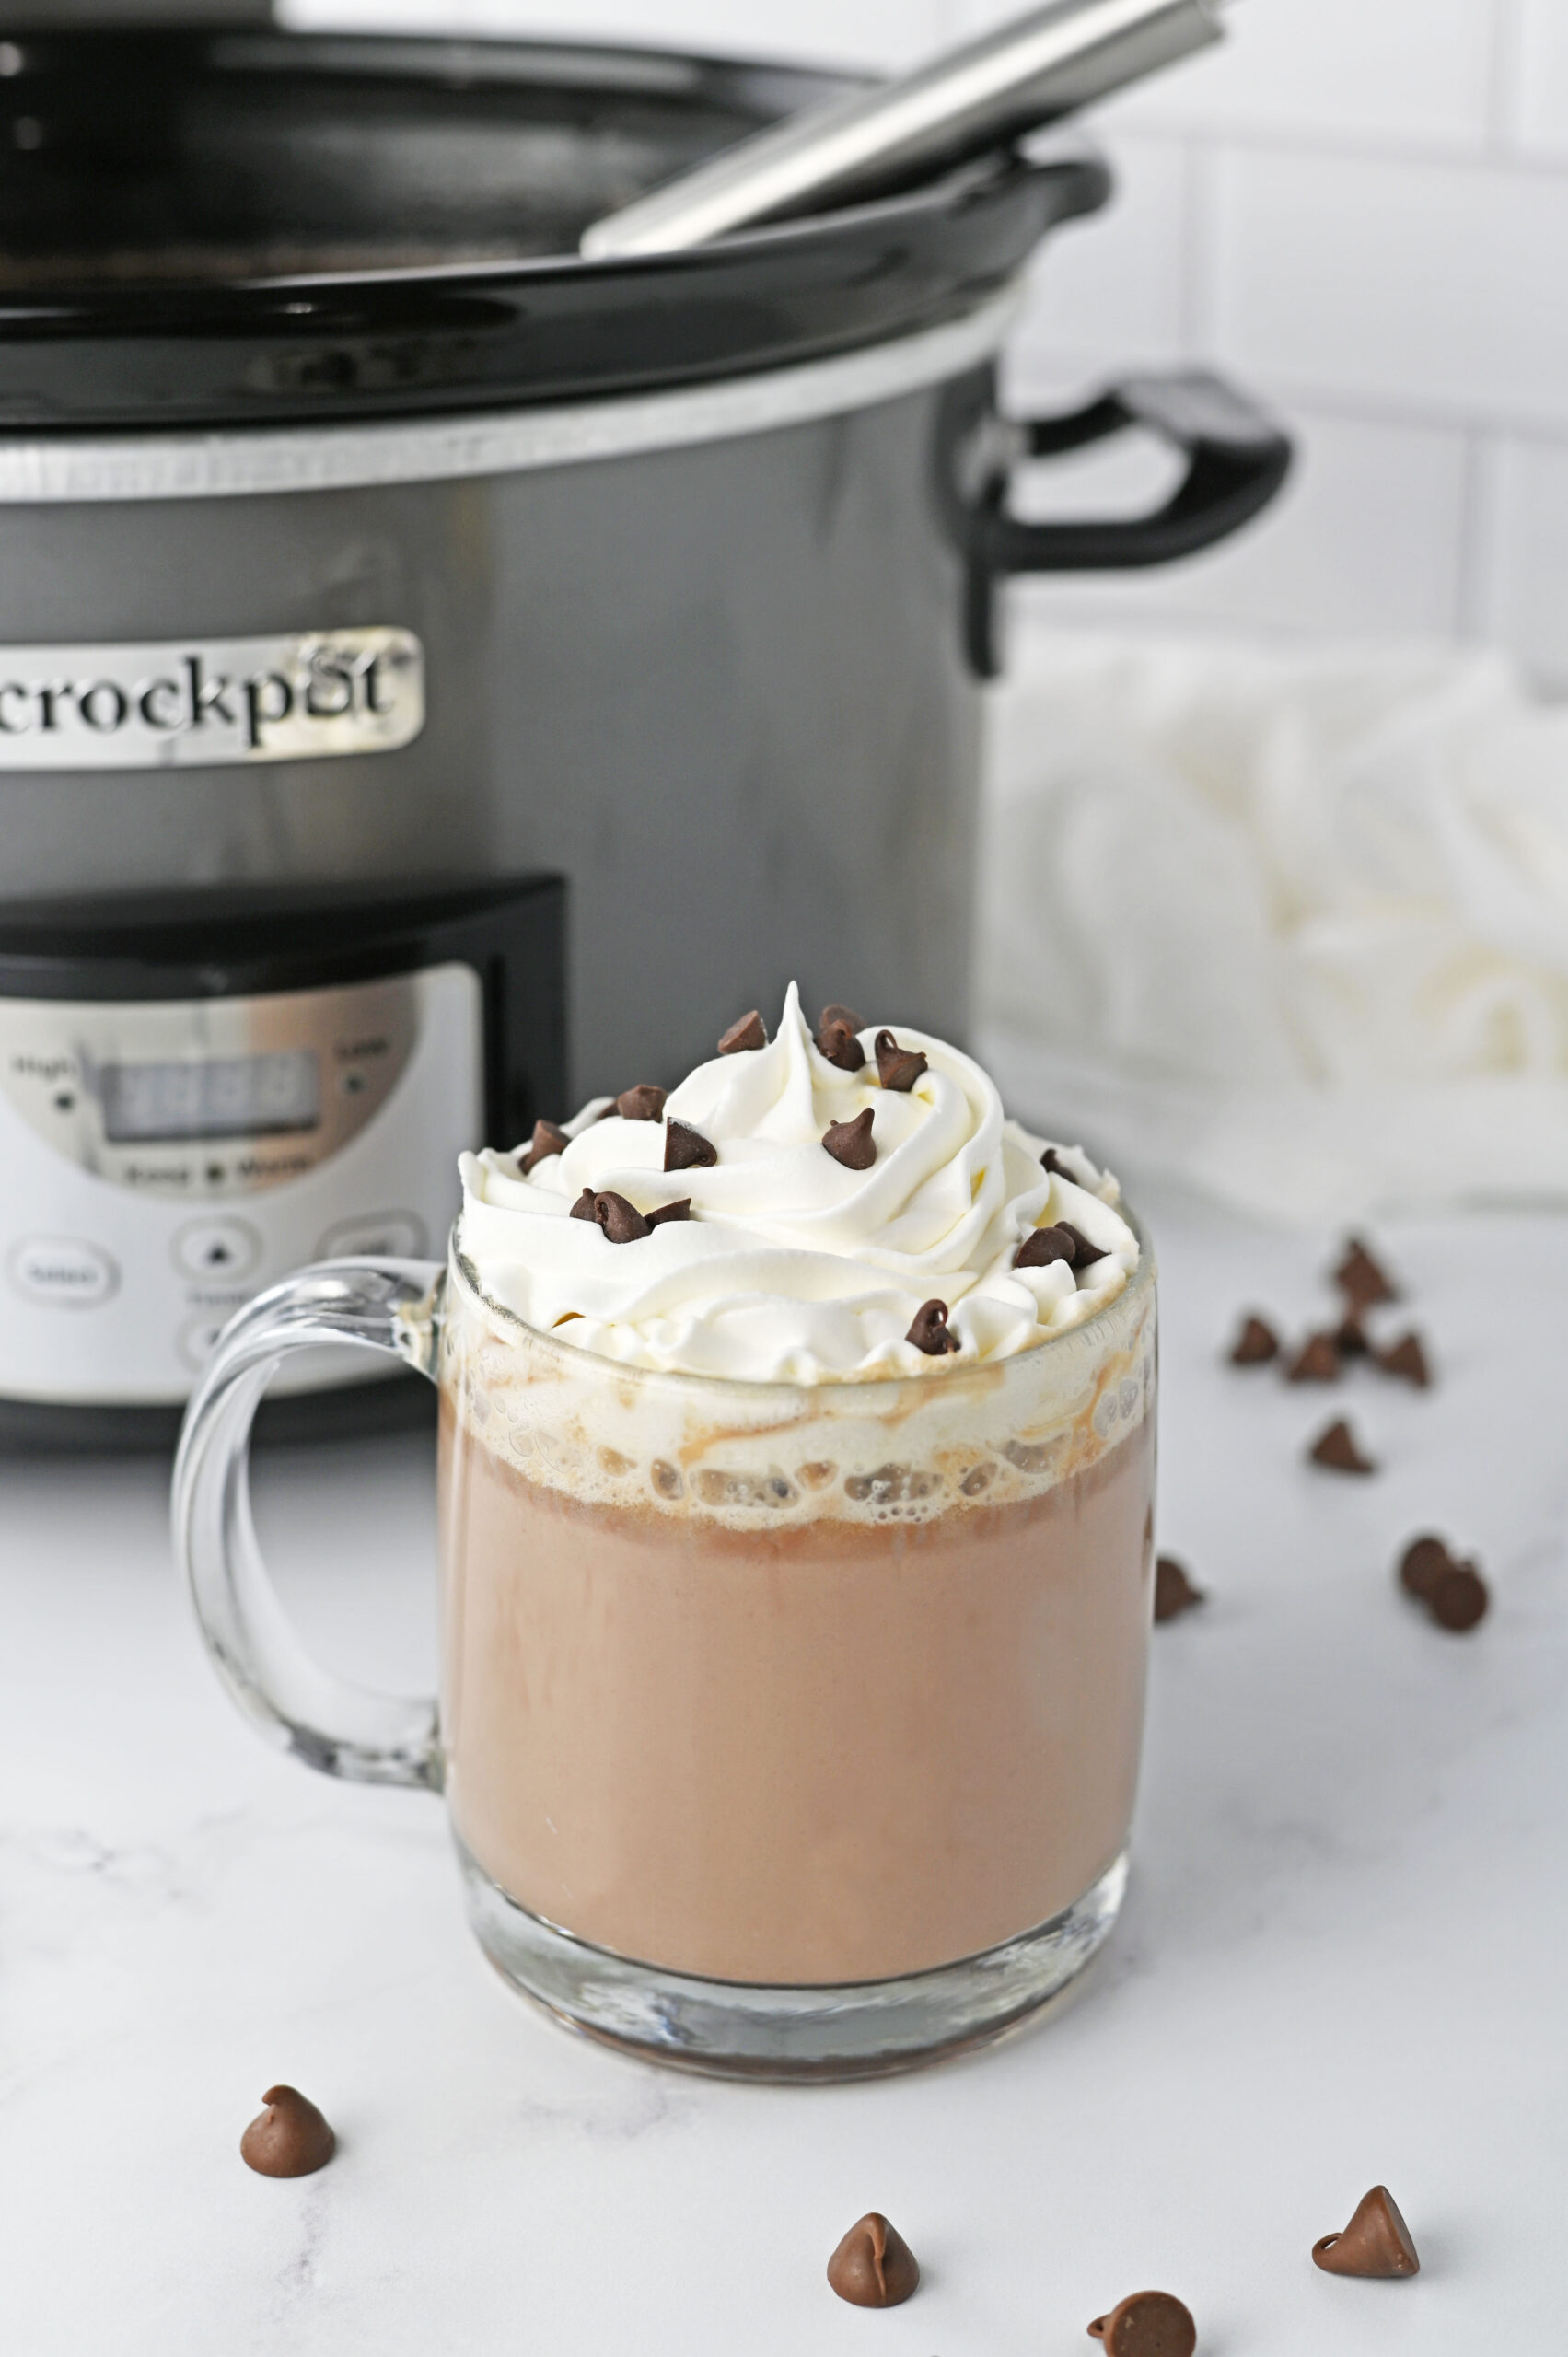 https://www.simplisticallyliving.com/wp-content/uploads/2015/12/Slow-Cooker-Hot-Chocolate3-scaled.jpg